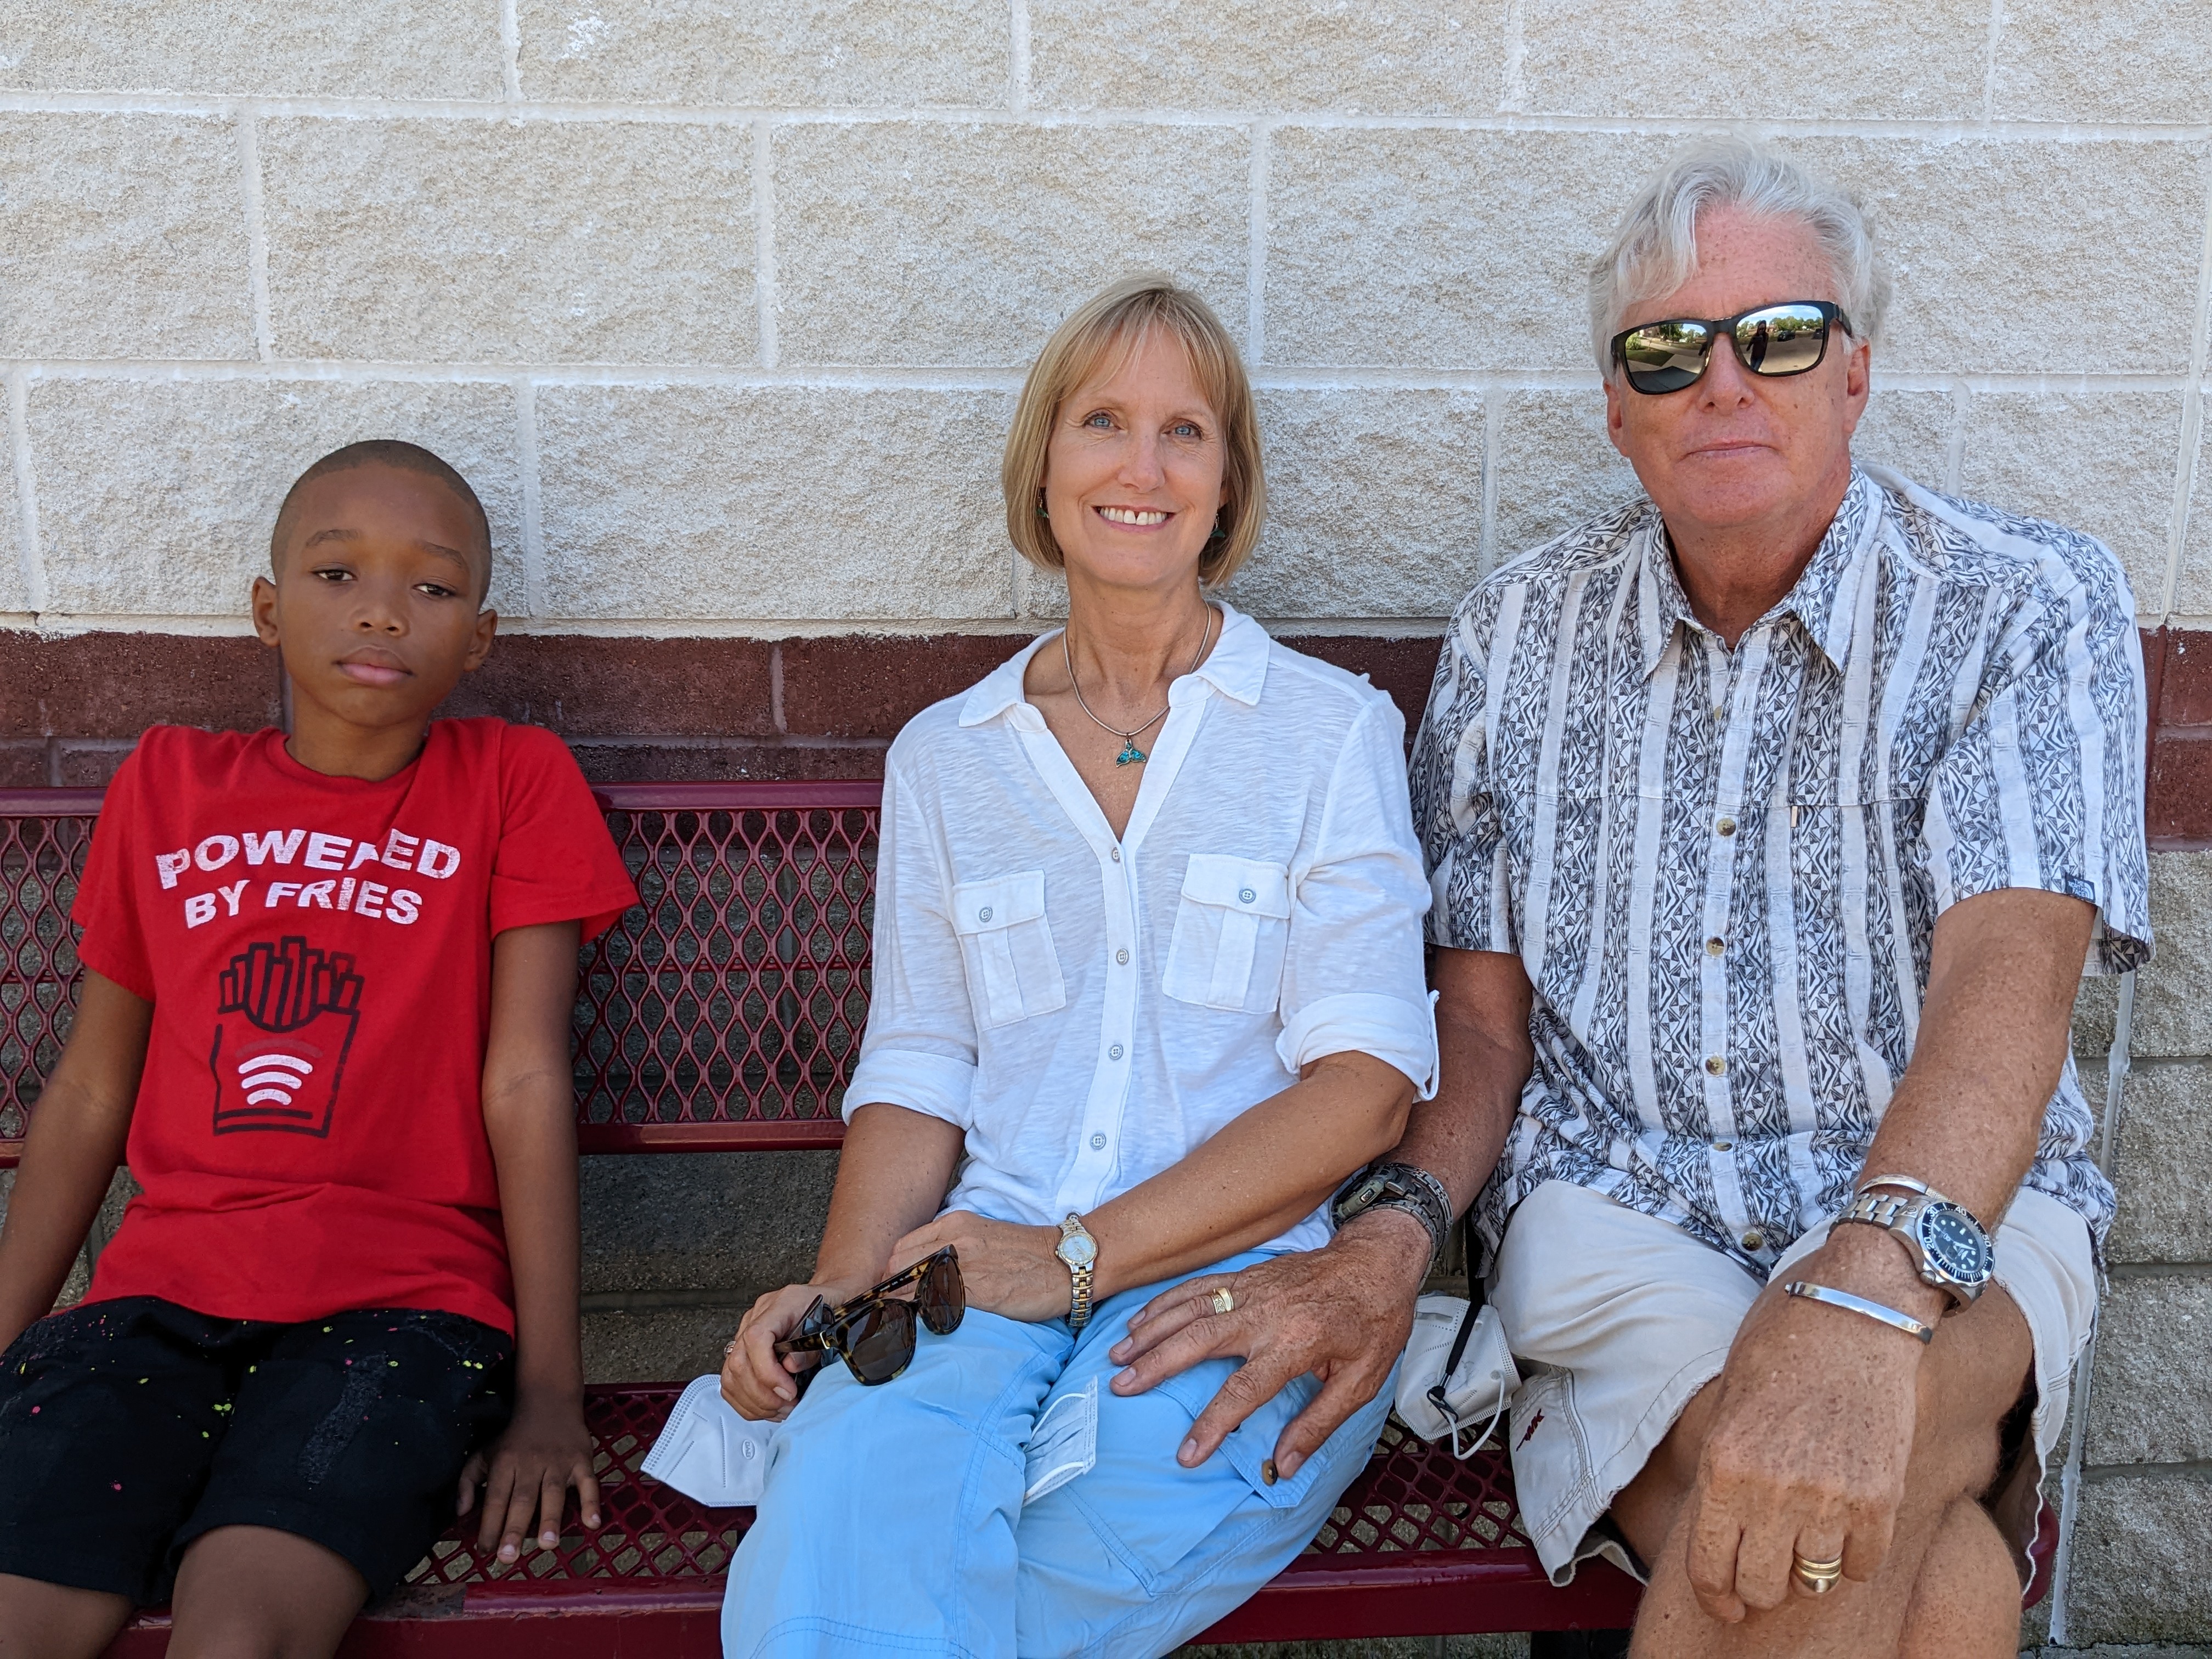 From the left, Jeremiah, Mary Roobol, and Paul Roobol, all sitting outside on a bench,